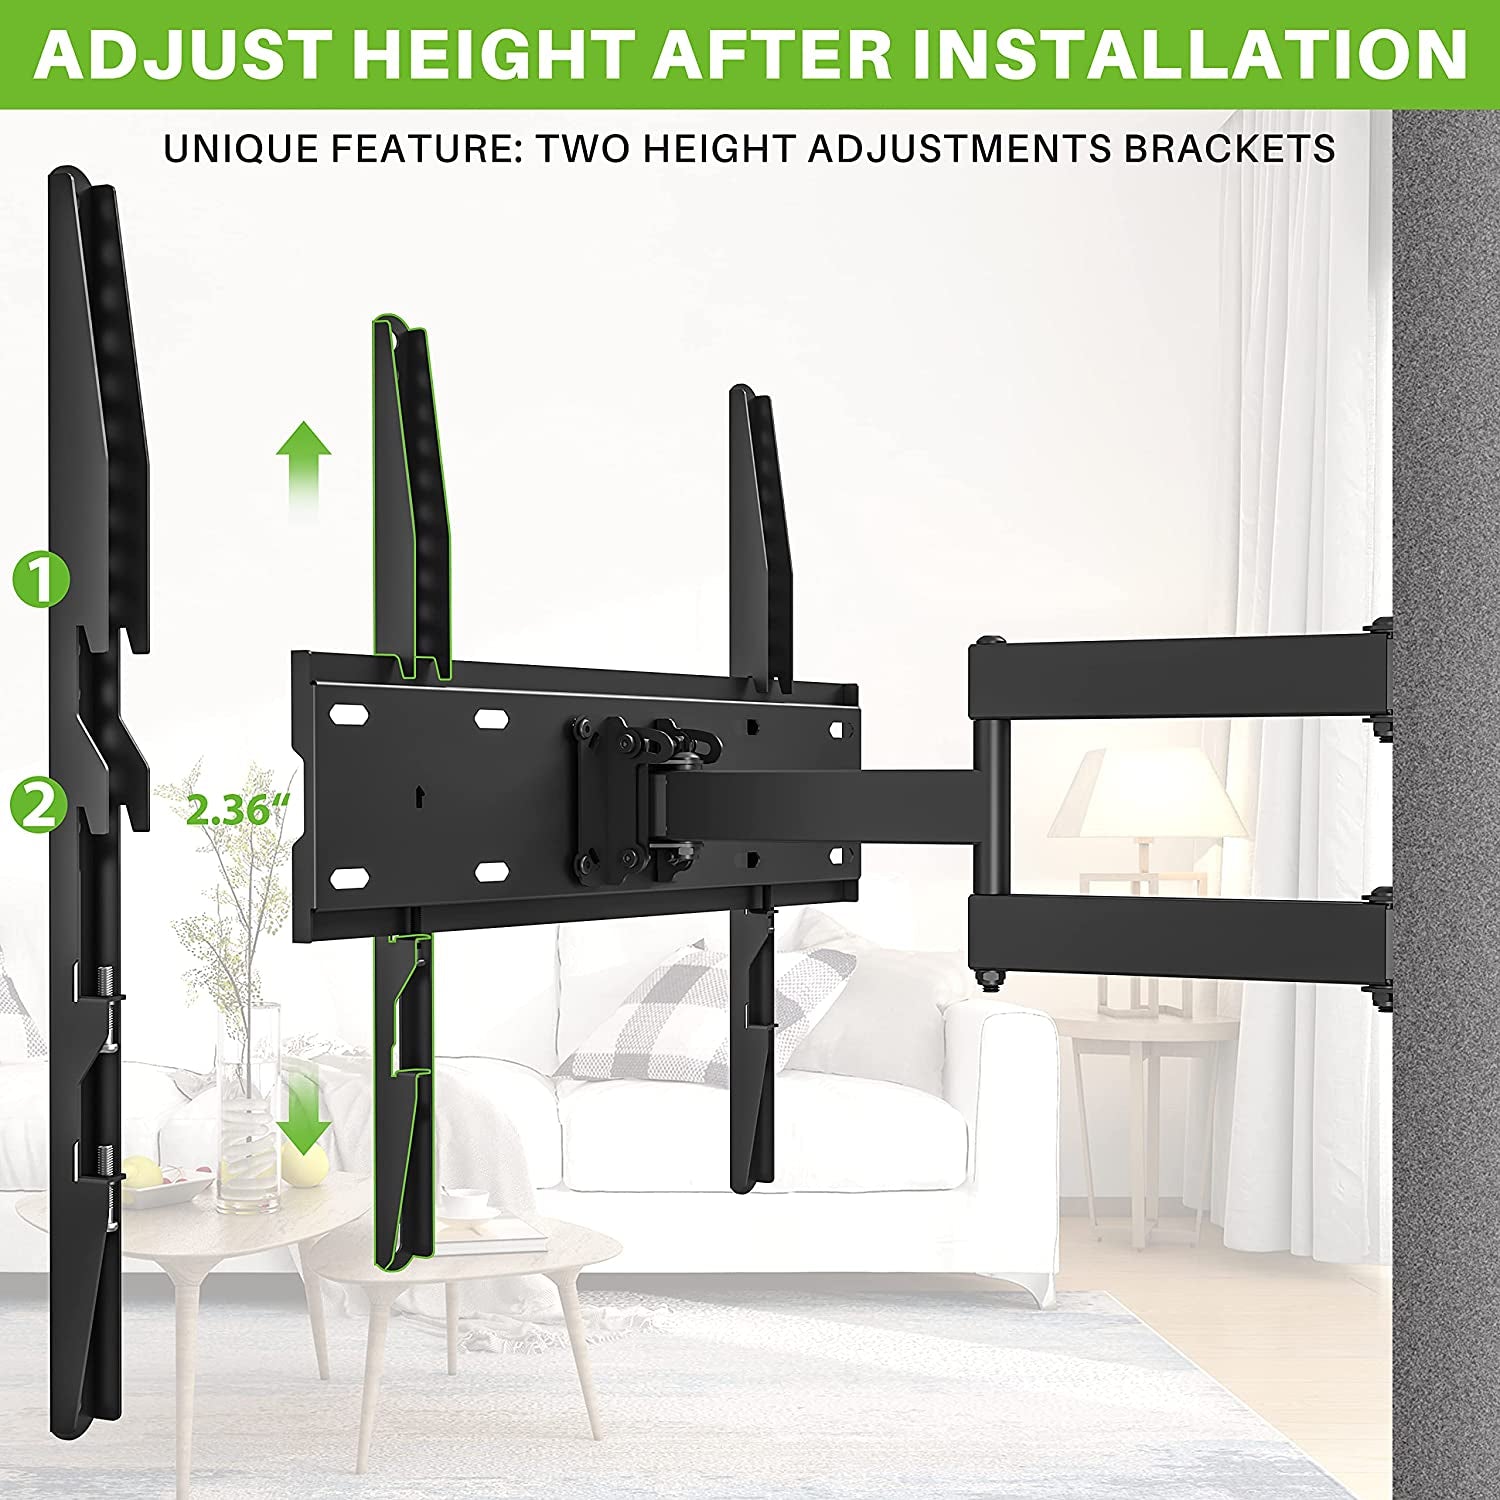 Full Motion TV Mount for Most 26-55 Inch - Everyday-Sales.com